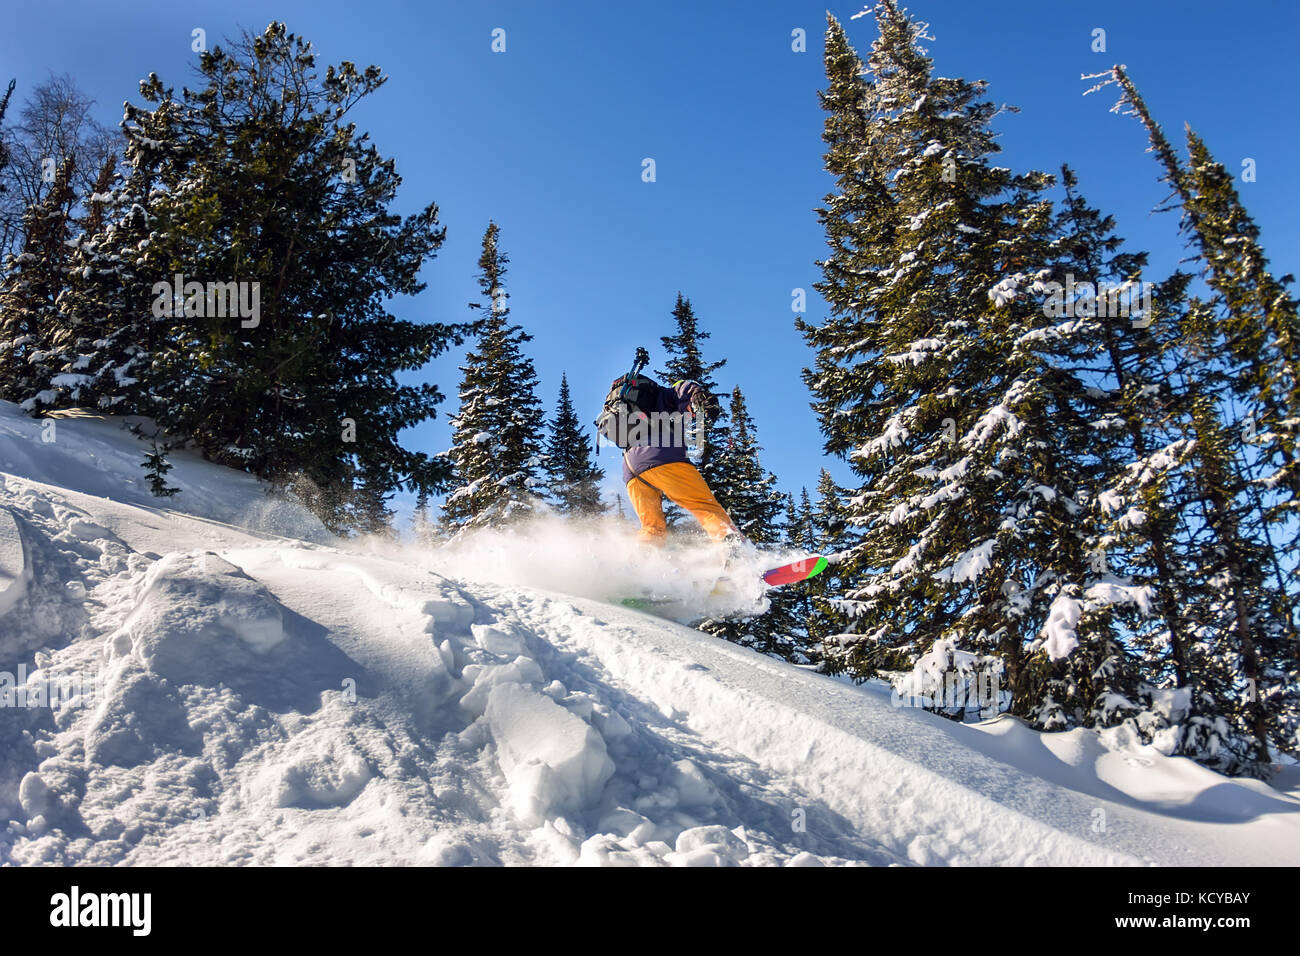 Snowboarder jump in snow powder backcountry freeride. Winter sports. Stock Photo